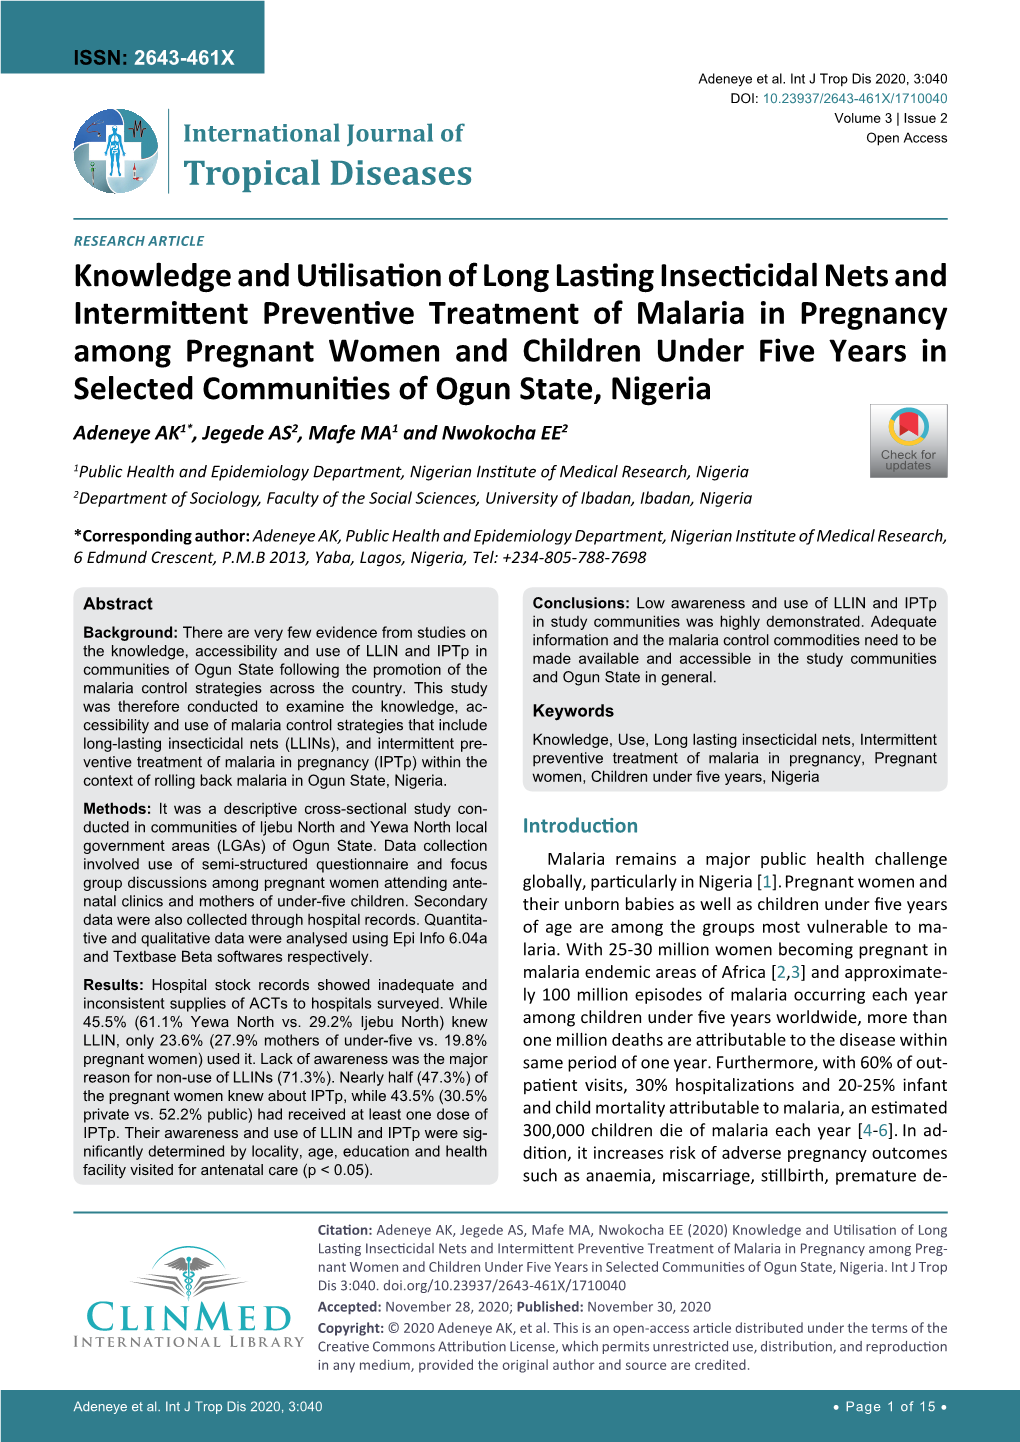 Knowledge and Utilisation of Long Lasting Insecticidal Nets And